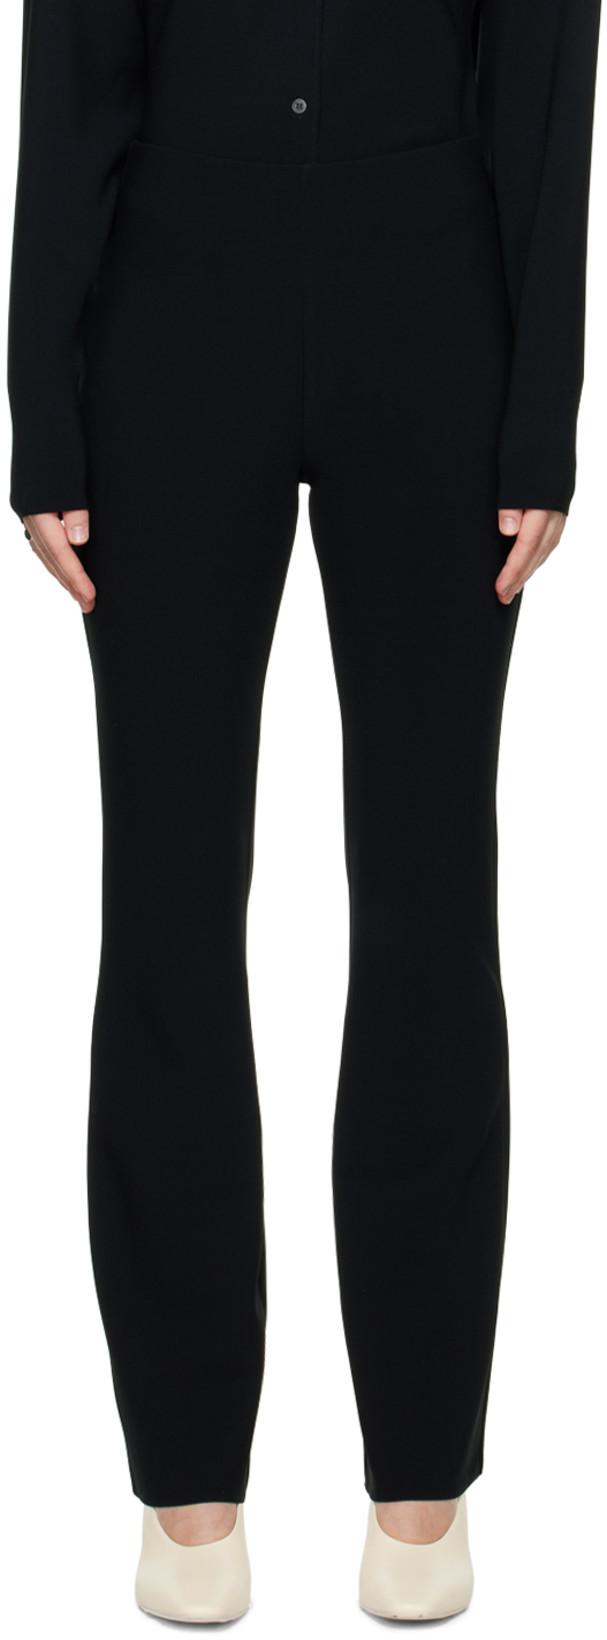 Black Bootcut Trousers by BIRROT